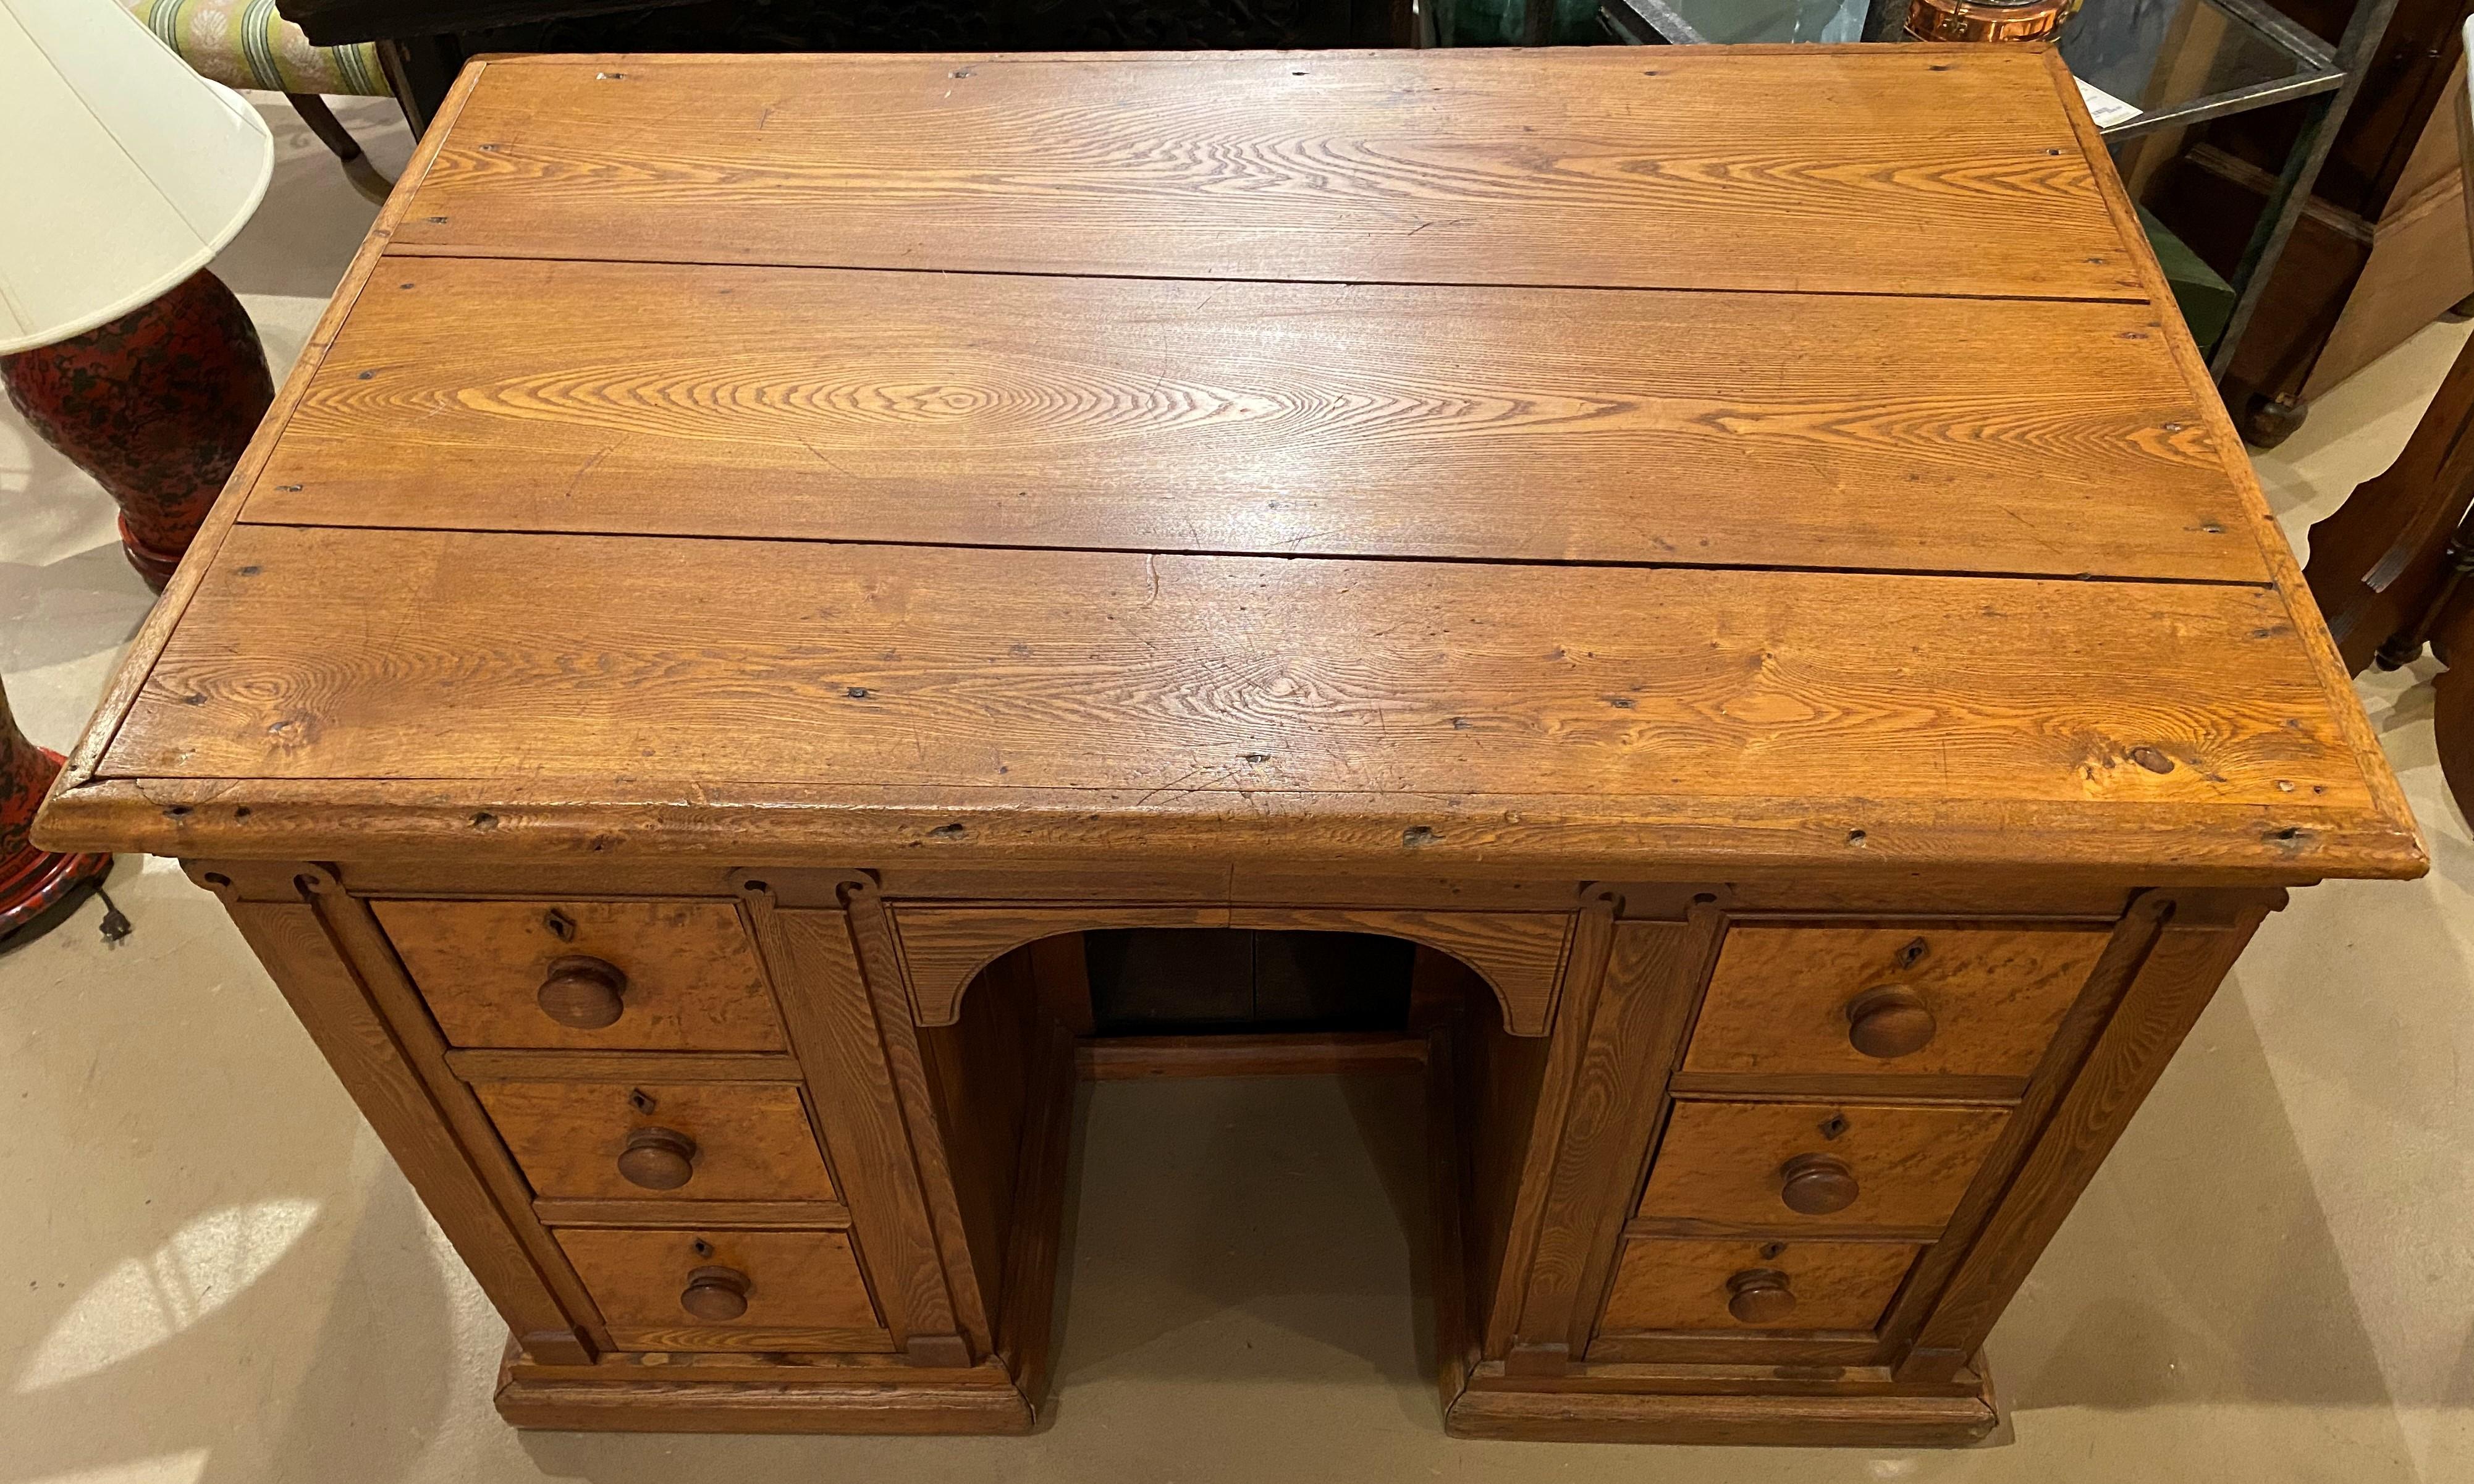 A nice example of an oak store paneled counter or six drawer kneehole desk, each dovetailed drawer with round wooden pulls and birdseye maple drawer fronts, a molded edge rectangular top, and a hidden single shelf storage area in the back of the